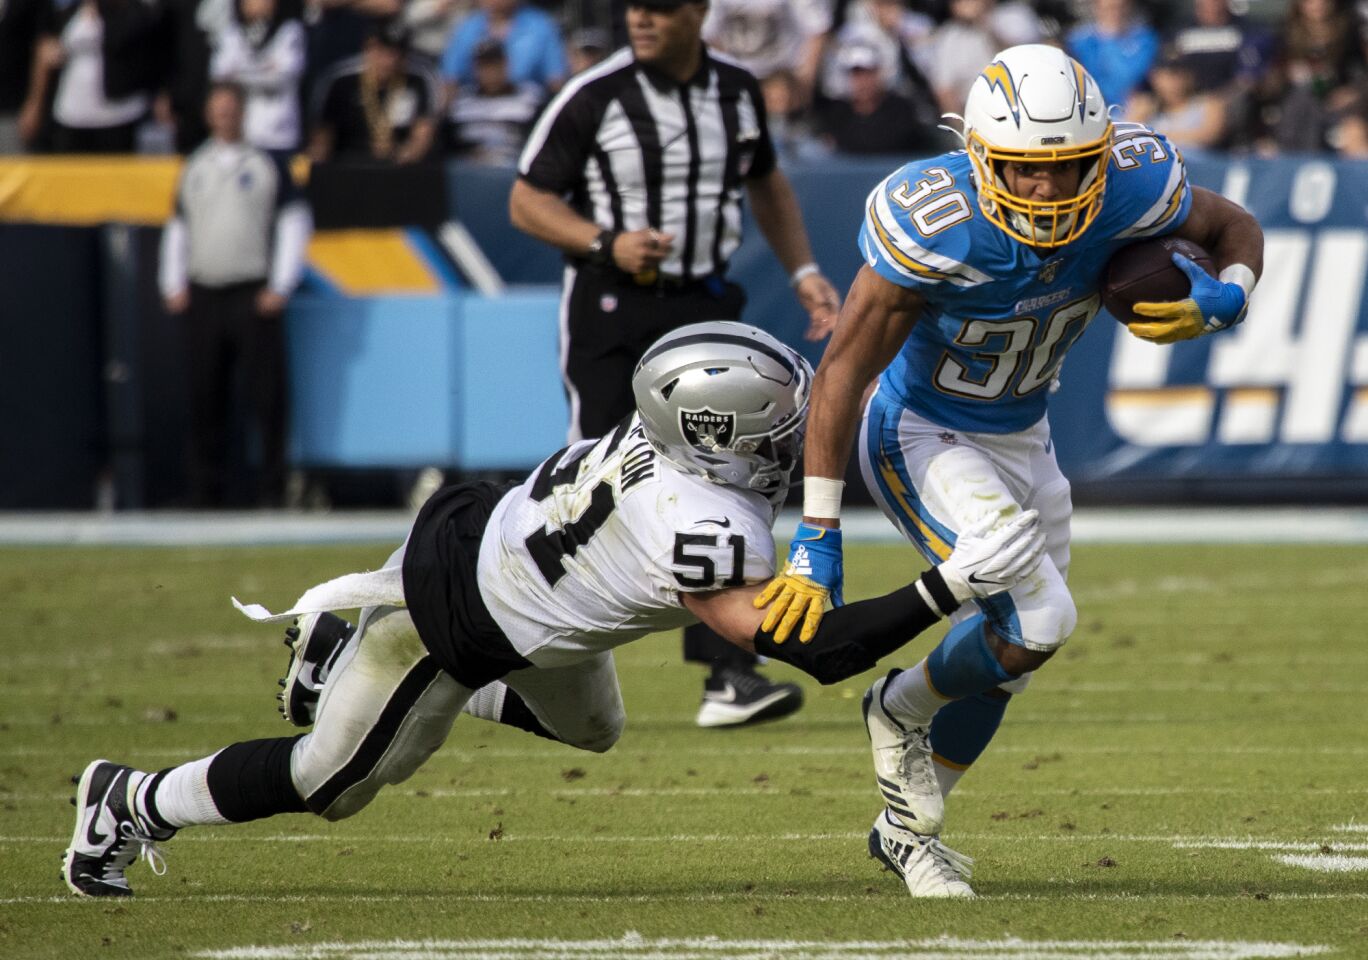 Chargers running back Austin Ekeler evades a tackle by Oakland Raiders inside linebacker Will Compton.